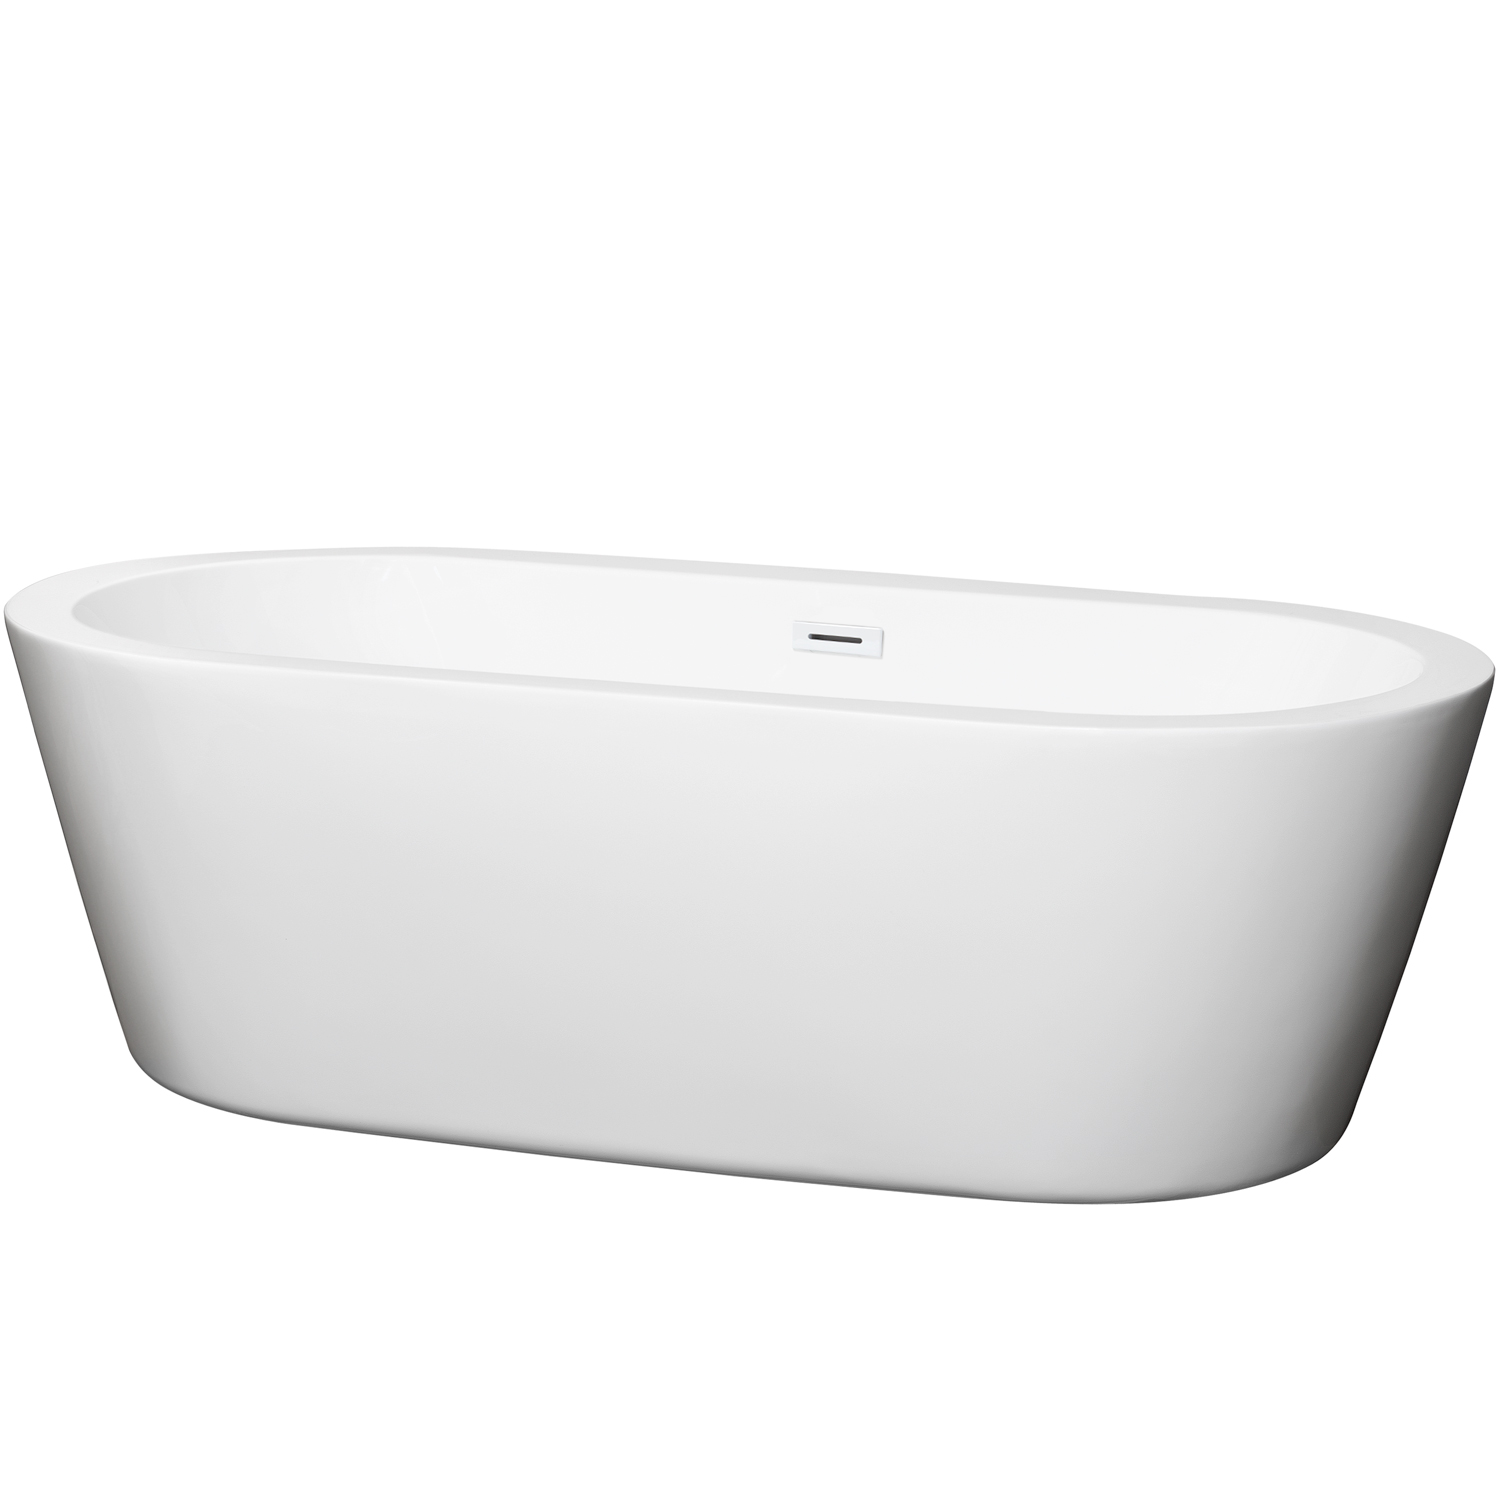 71" Freestanding Bathtub in White with Shiny White Drain and Overflow Trim Finish